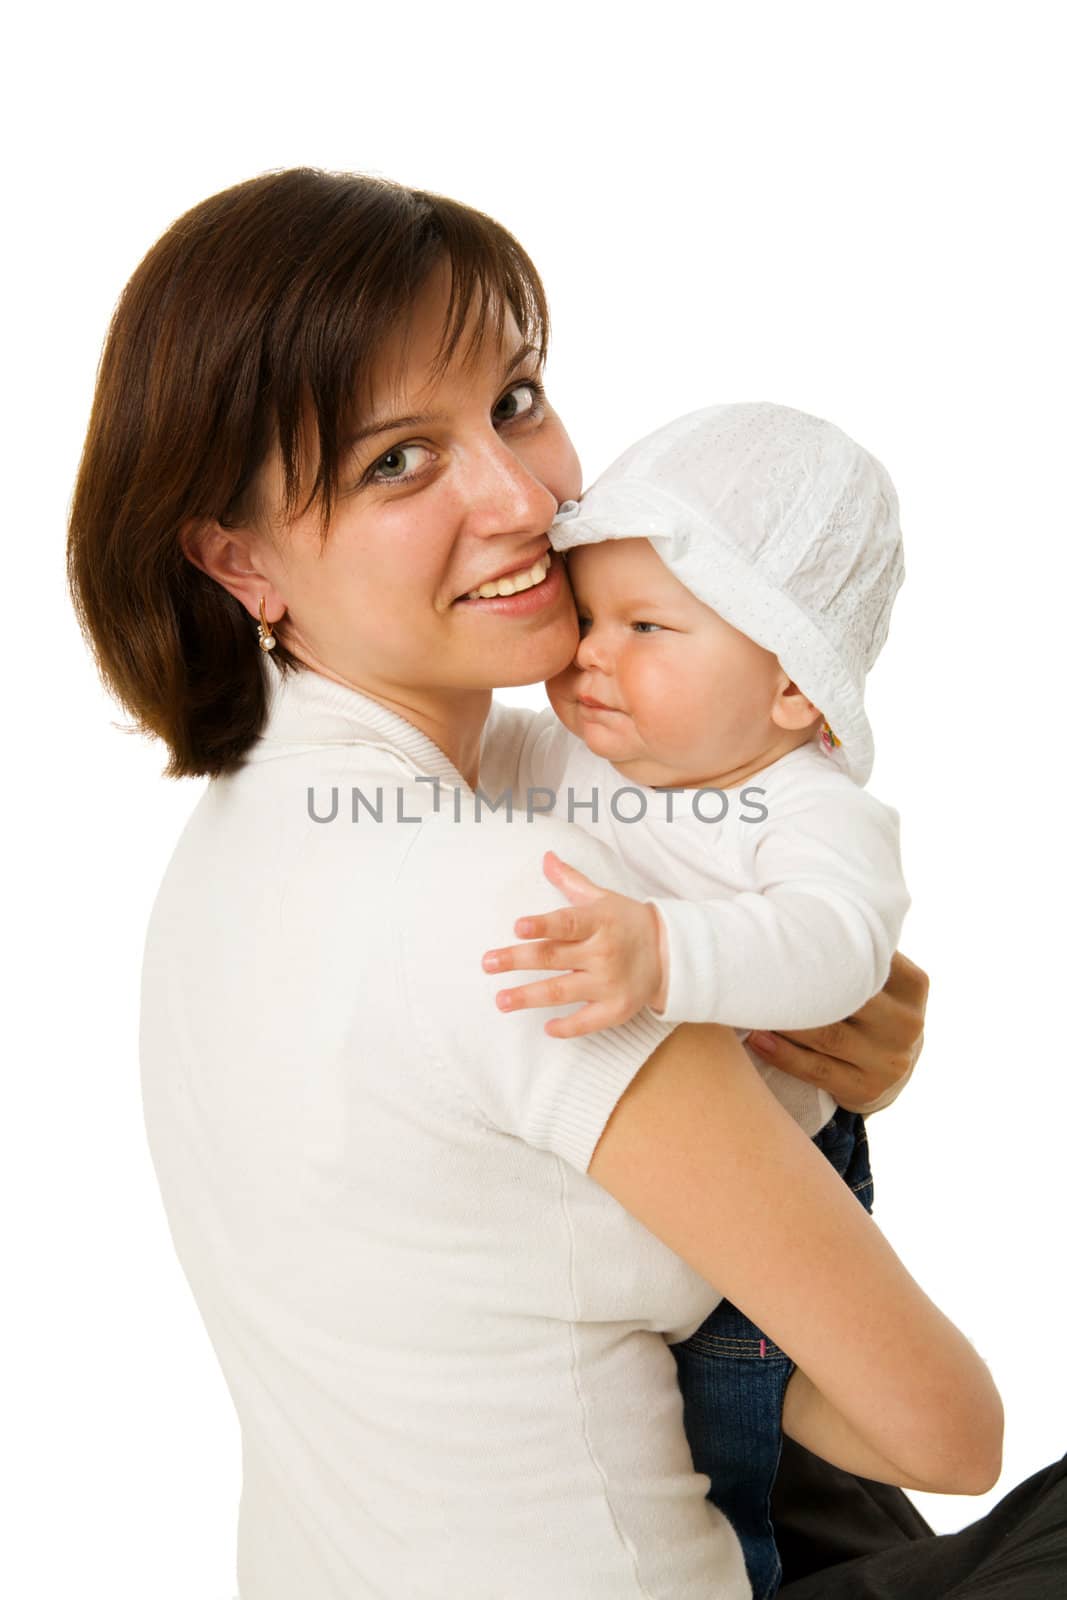 Mother with baby happy together isolated on white